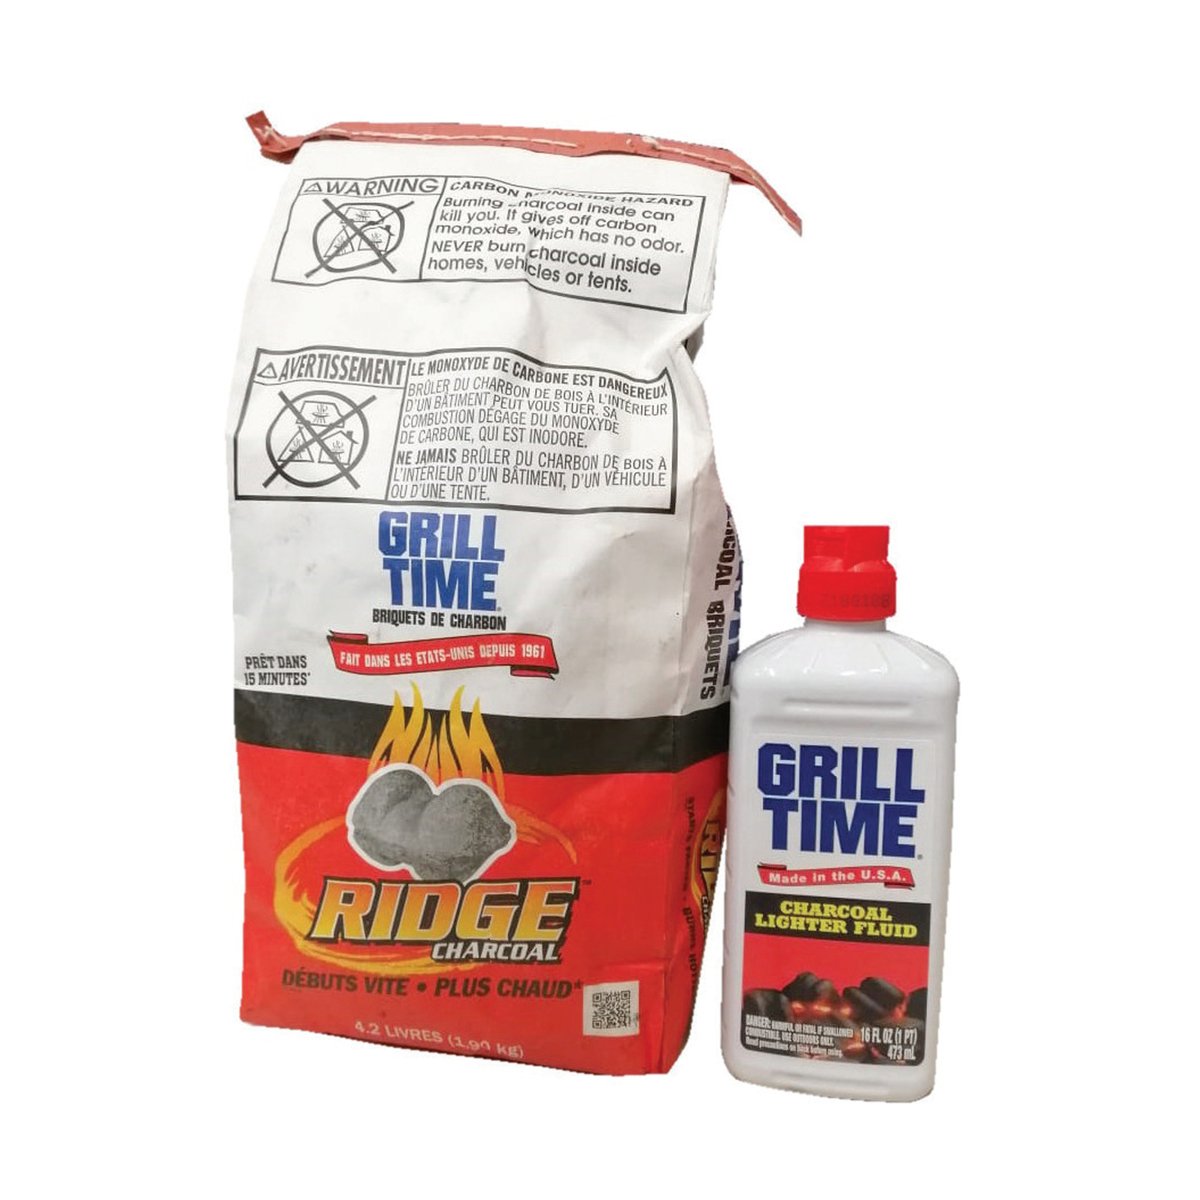 Grill Time Charcoal 8.3Lb + Lighter Fluid 16oz 